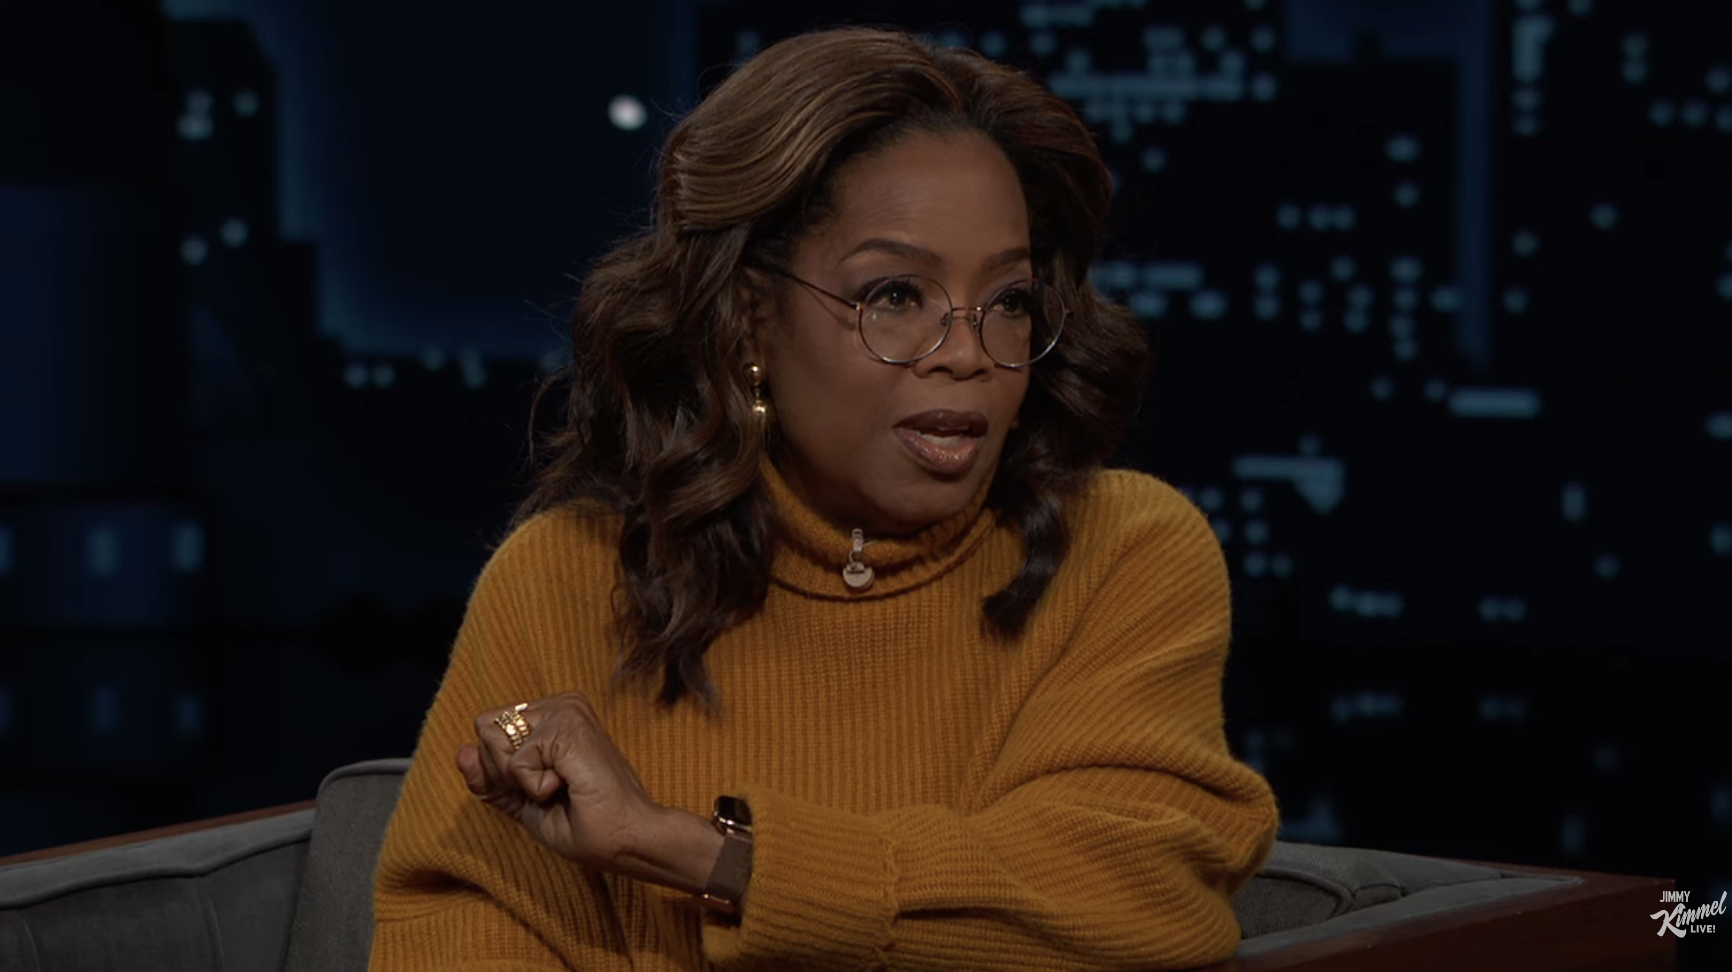 Oprah Winfrey in a sweater seated on a talk show set with a cityscape background